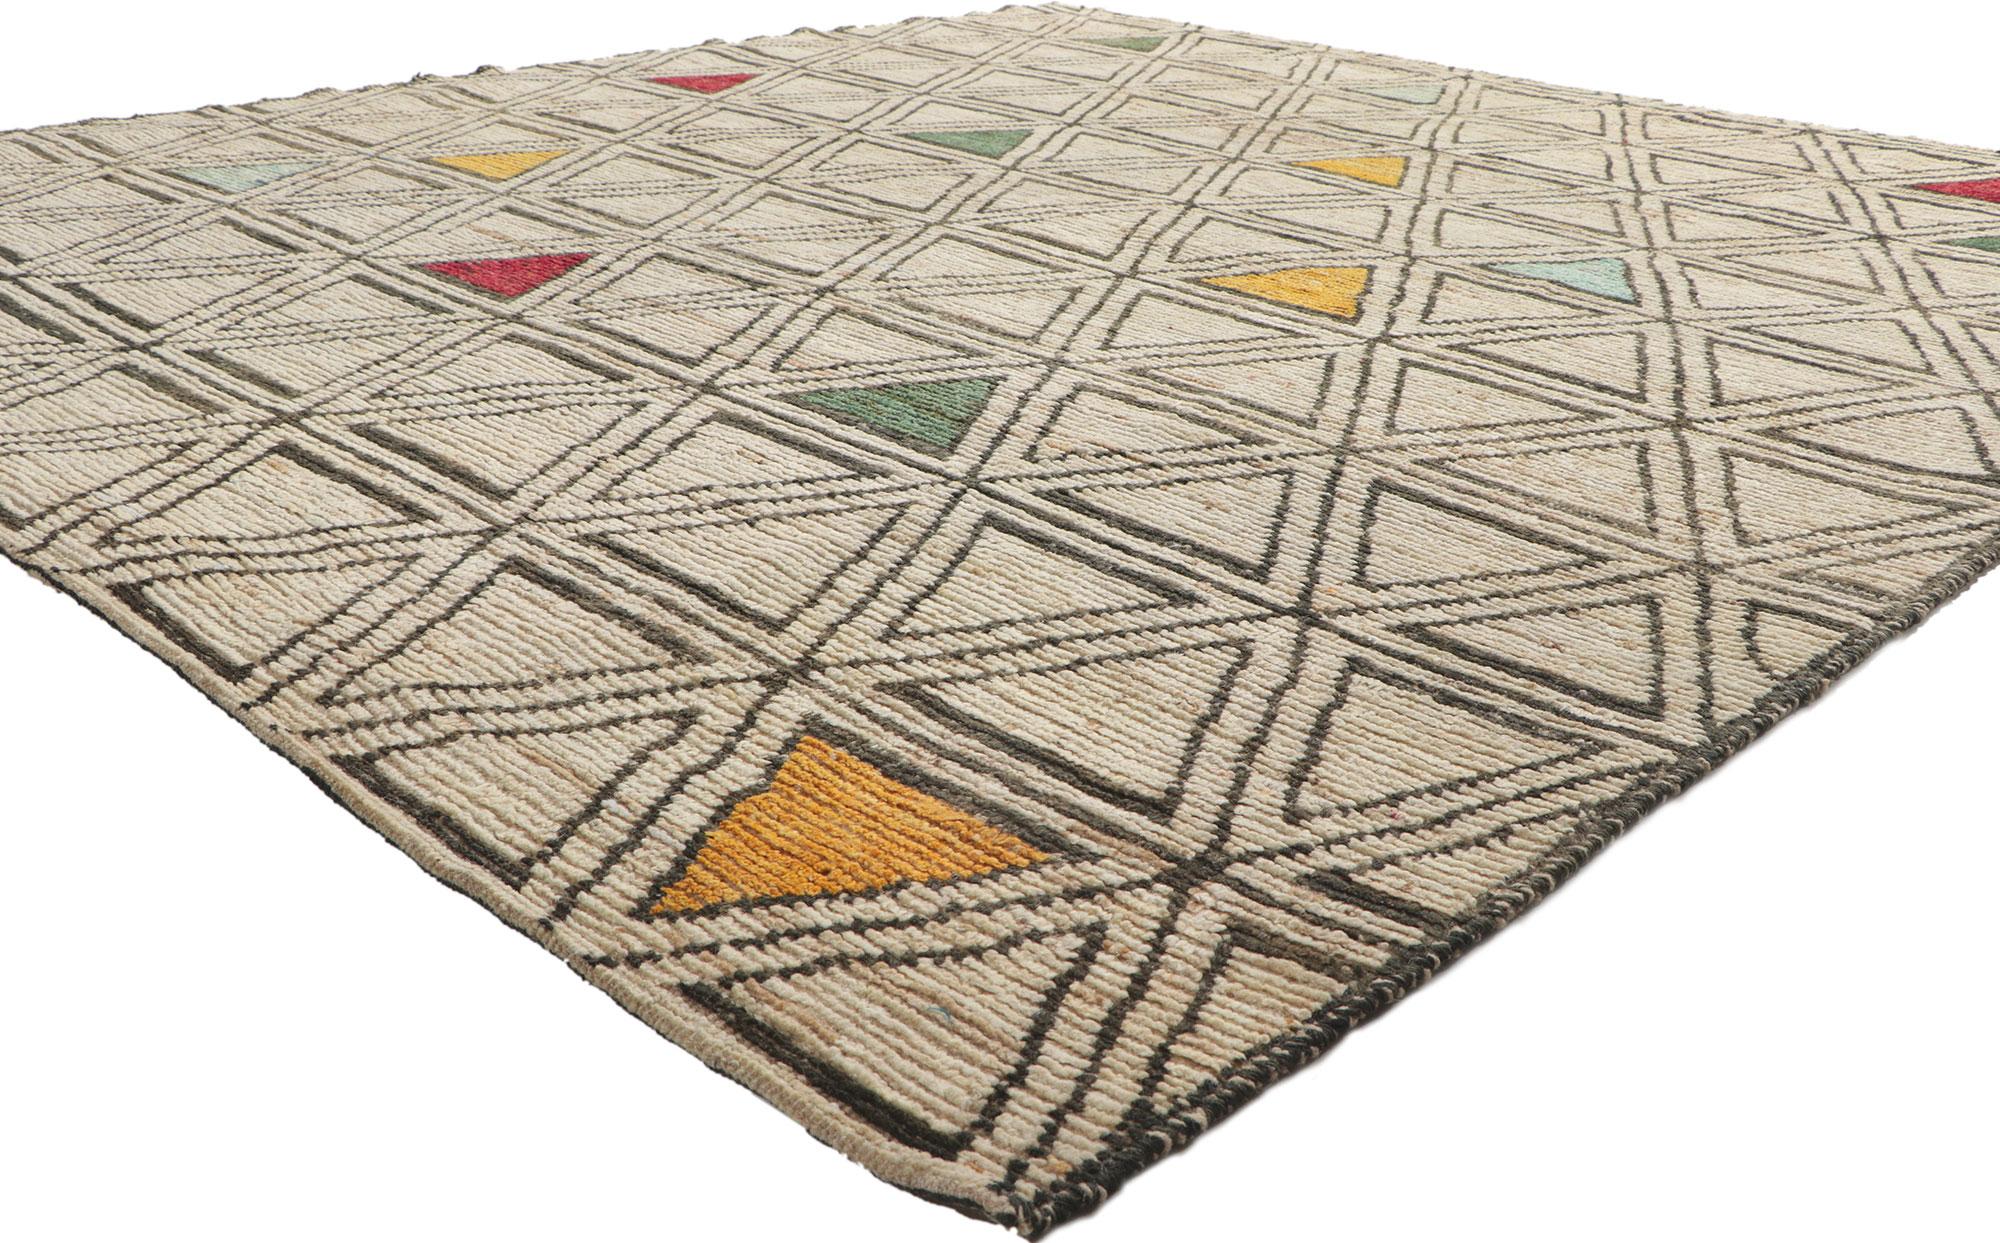 80802 Geometric Moroccan Rug, 08'04 x 09'02. Emanating triangular tessellation with incredible detail and texture, this hand knotted wool Moroccan rug is a captivating vision of woven beauty. The eye-catching geometric pattern and earthy colorway